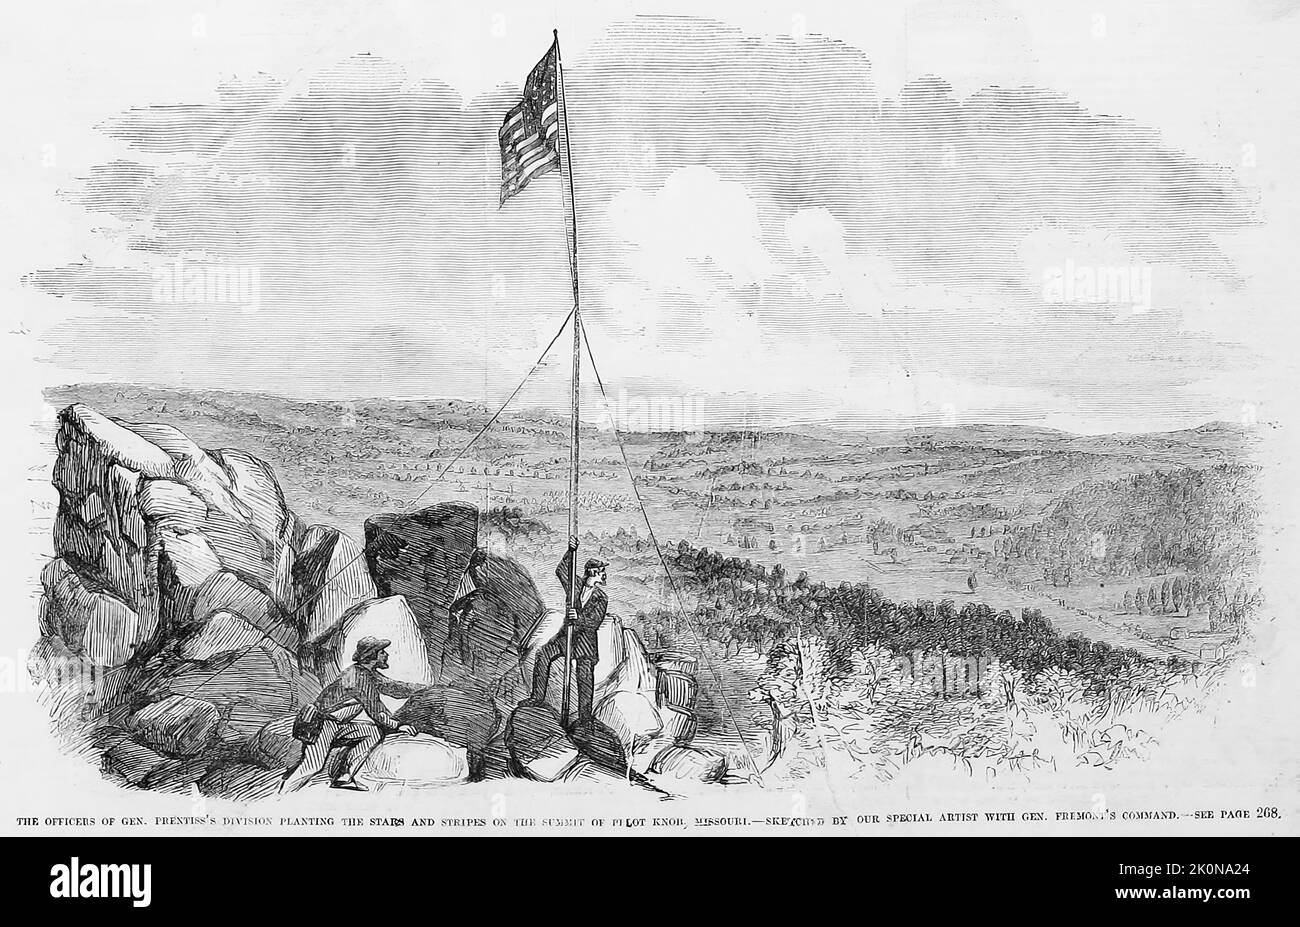 The officers of General Benjamin Mayberry Prentiss' Division planting the Stars and Stripes on the summit of Pilot Knob, Missouri. September 1861. 19th century American Civil War illustration from Frank Leslie's Illustrated Newspaper Stock Photo